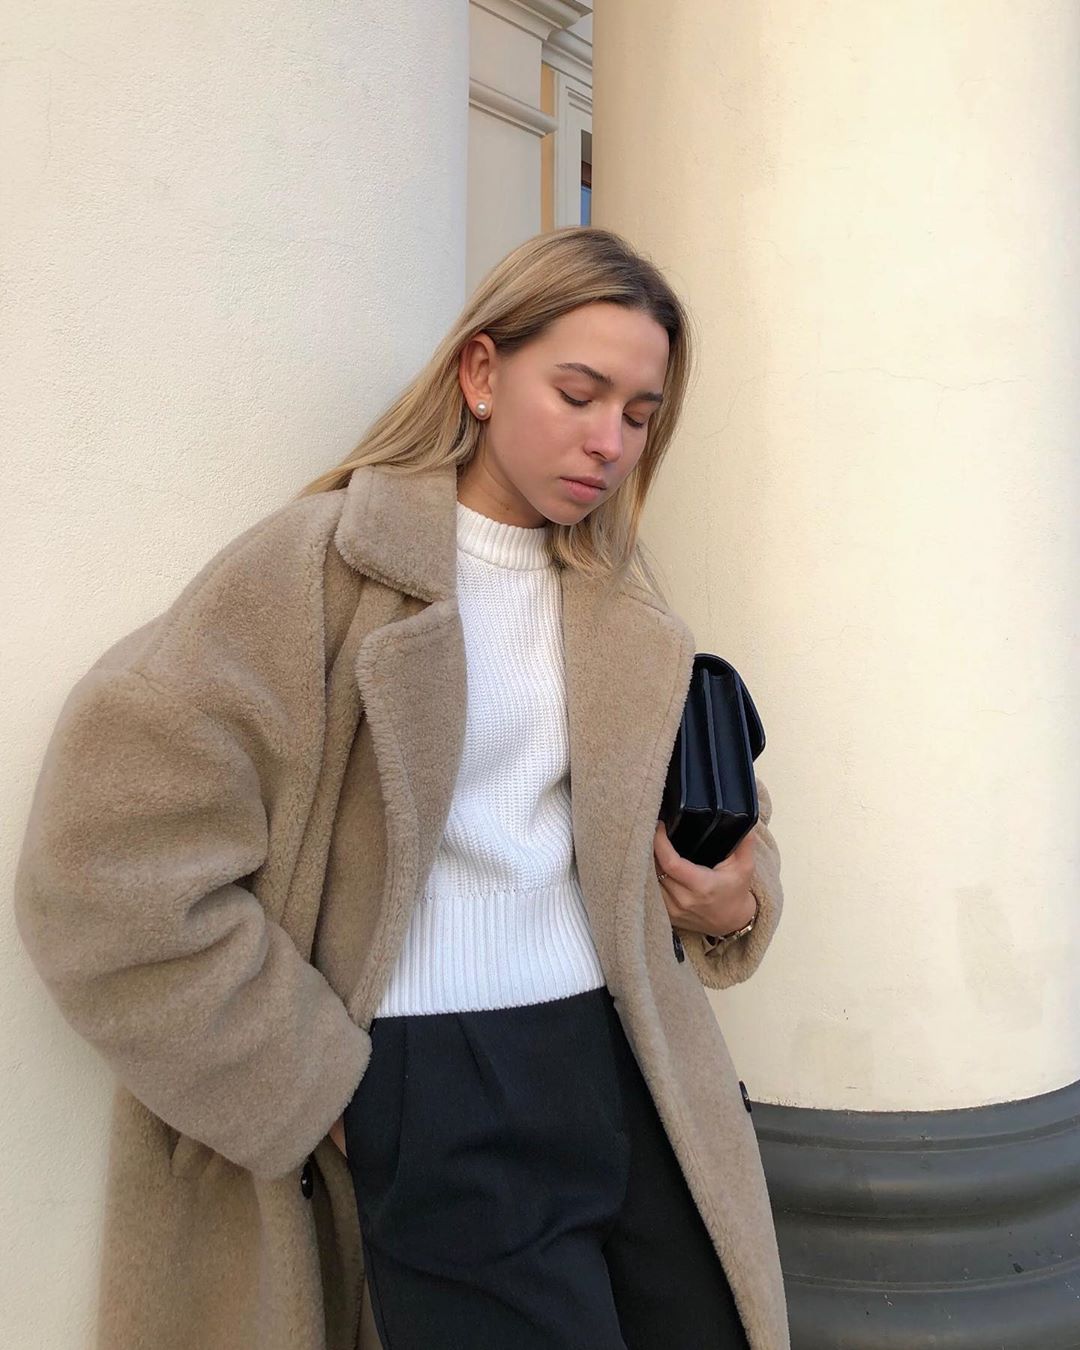 Cozy Yet Elevated Fall and Winter Outfit Idea — WFH Work From Home Style — @mikhailova_maria In a Teddy Coat, White Knit Sweater, Black Clutch Bag, and Black Pants